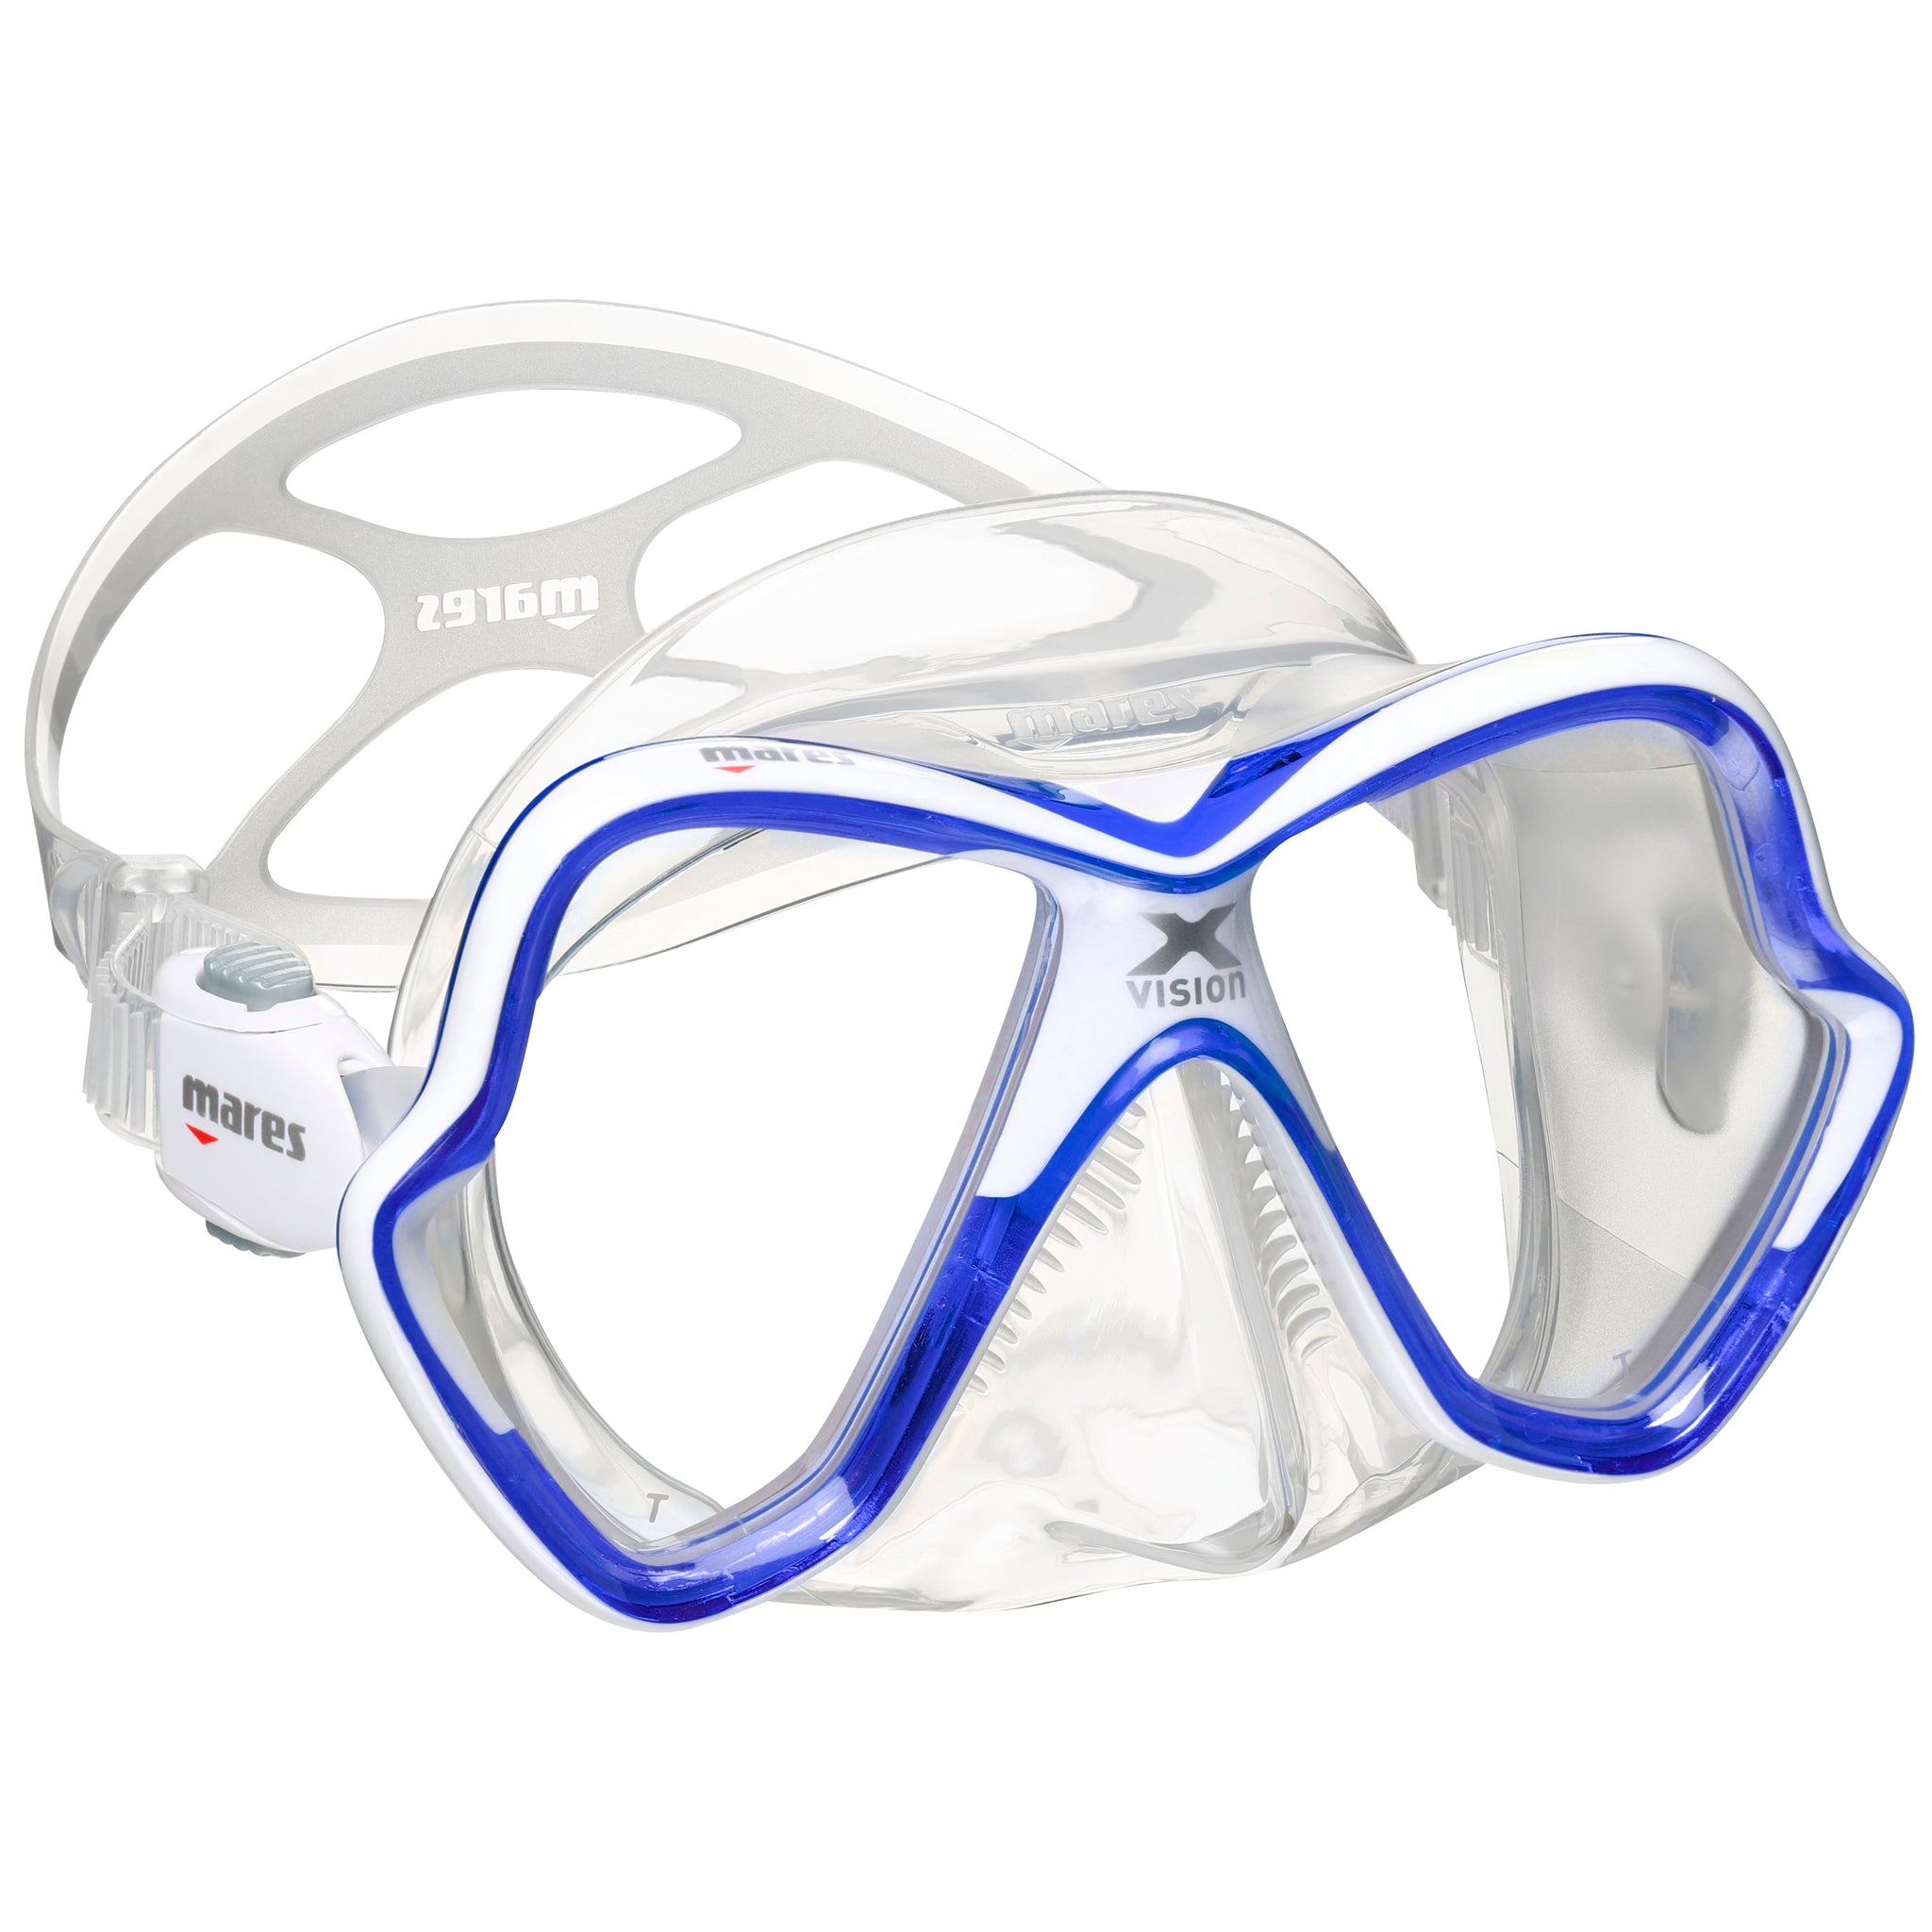 Mares X Vision Mask | Blue/White